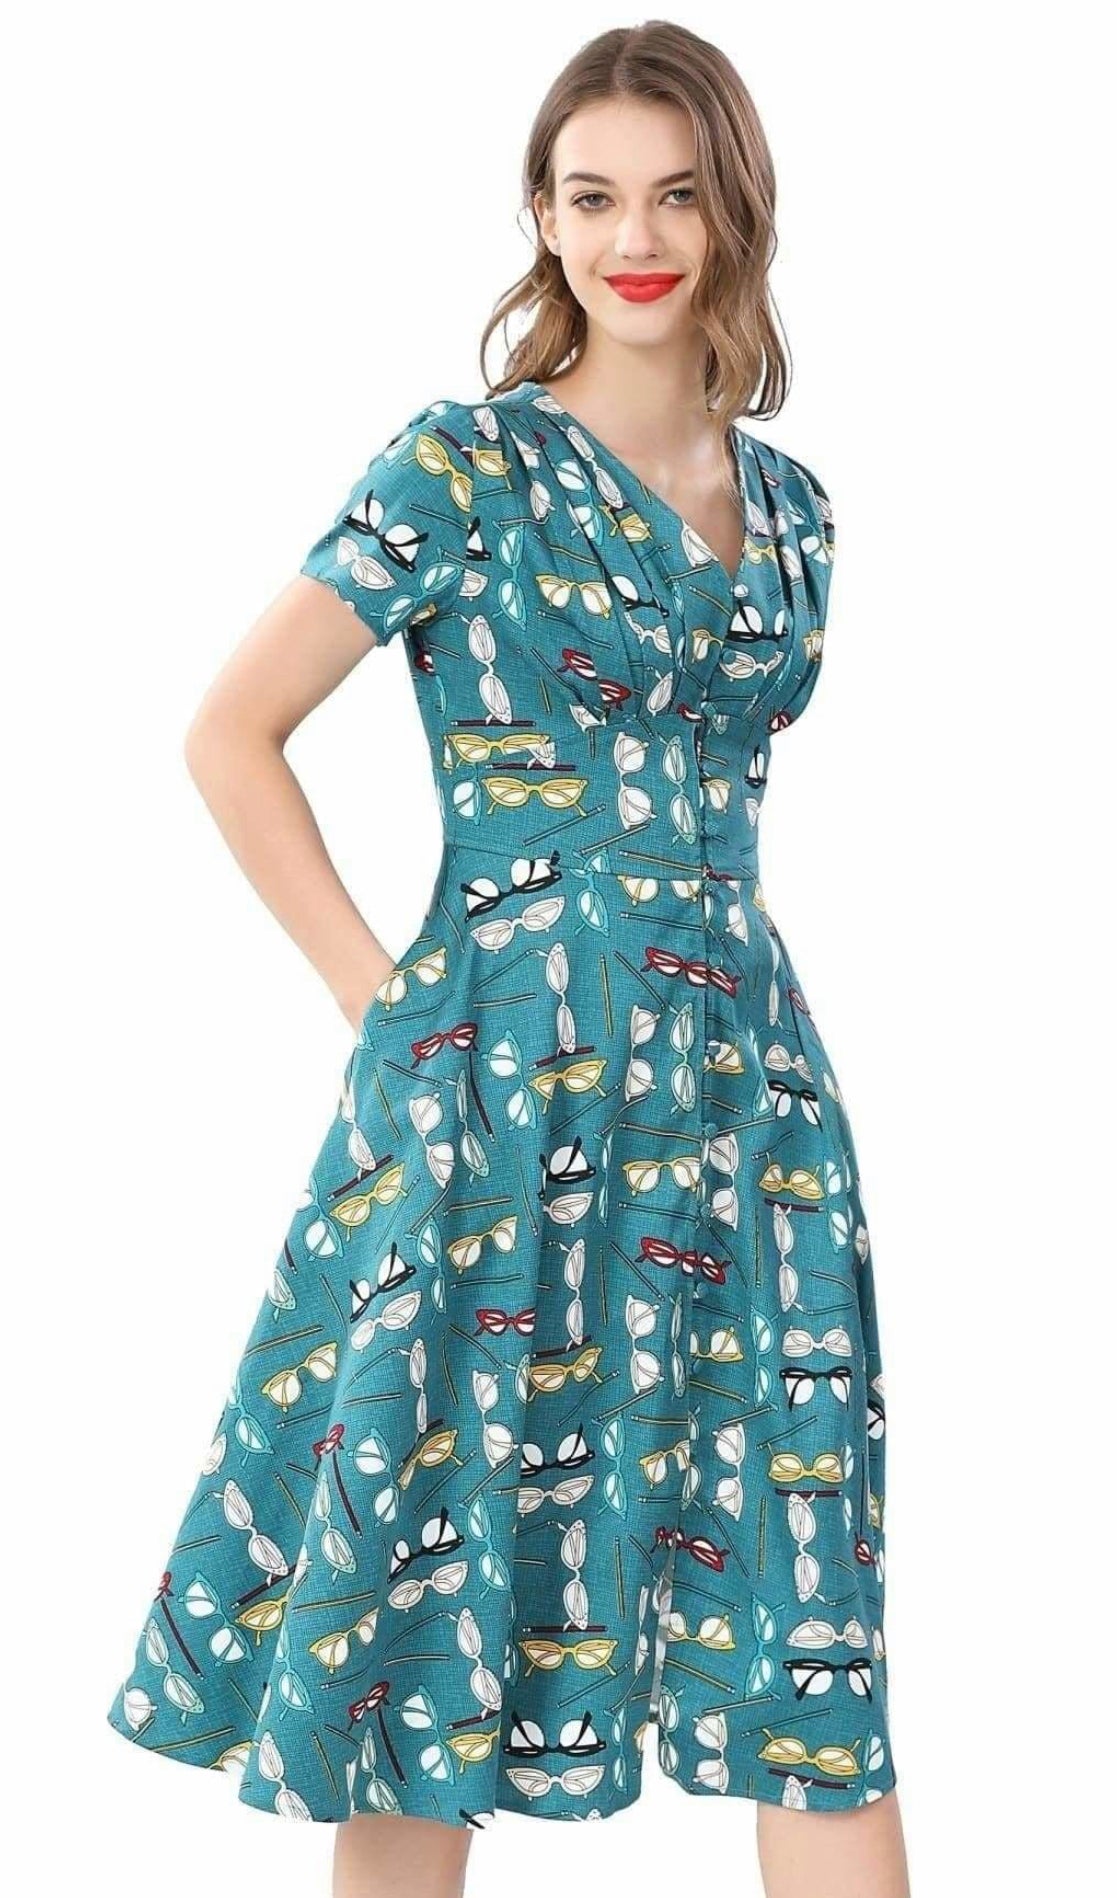 New Fun Green with Glasses & Pencil V Neck Button Front A Line Short Sleeve Cotton Dress with Pockets